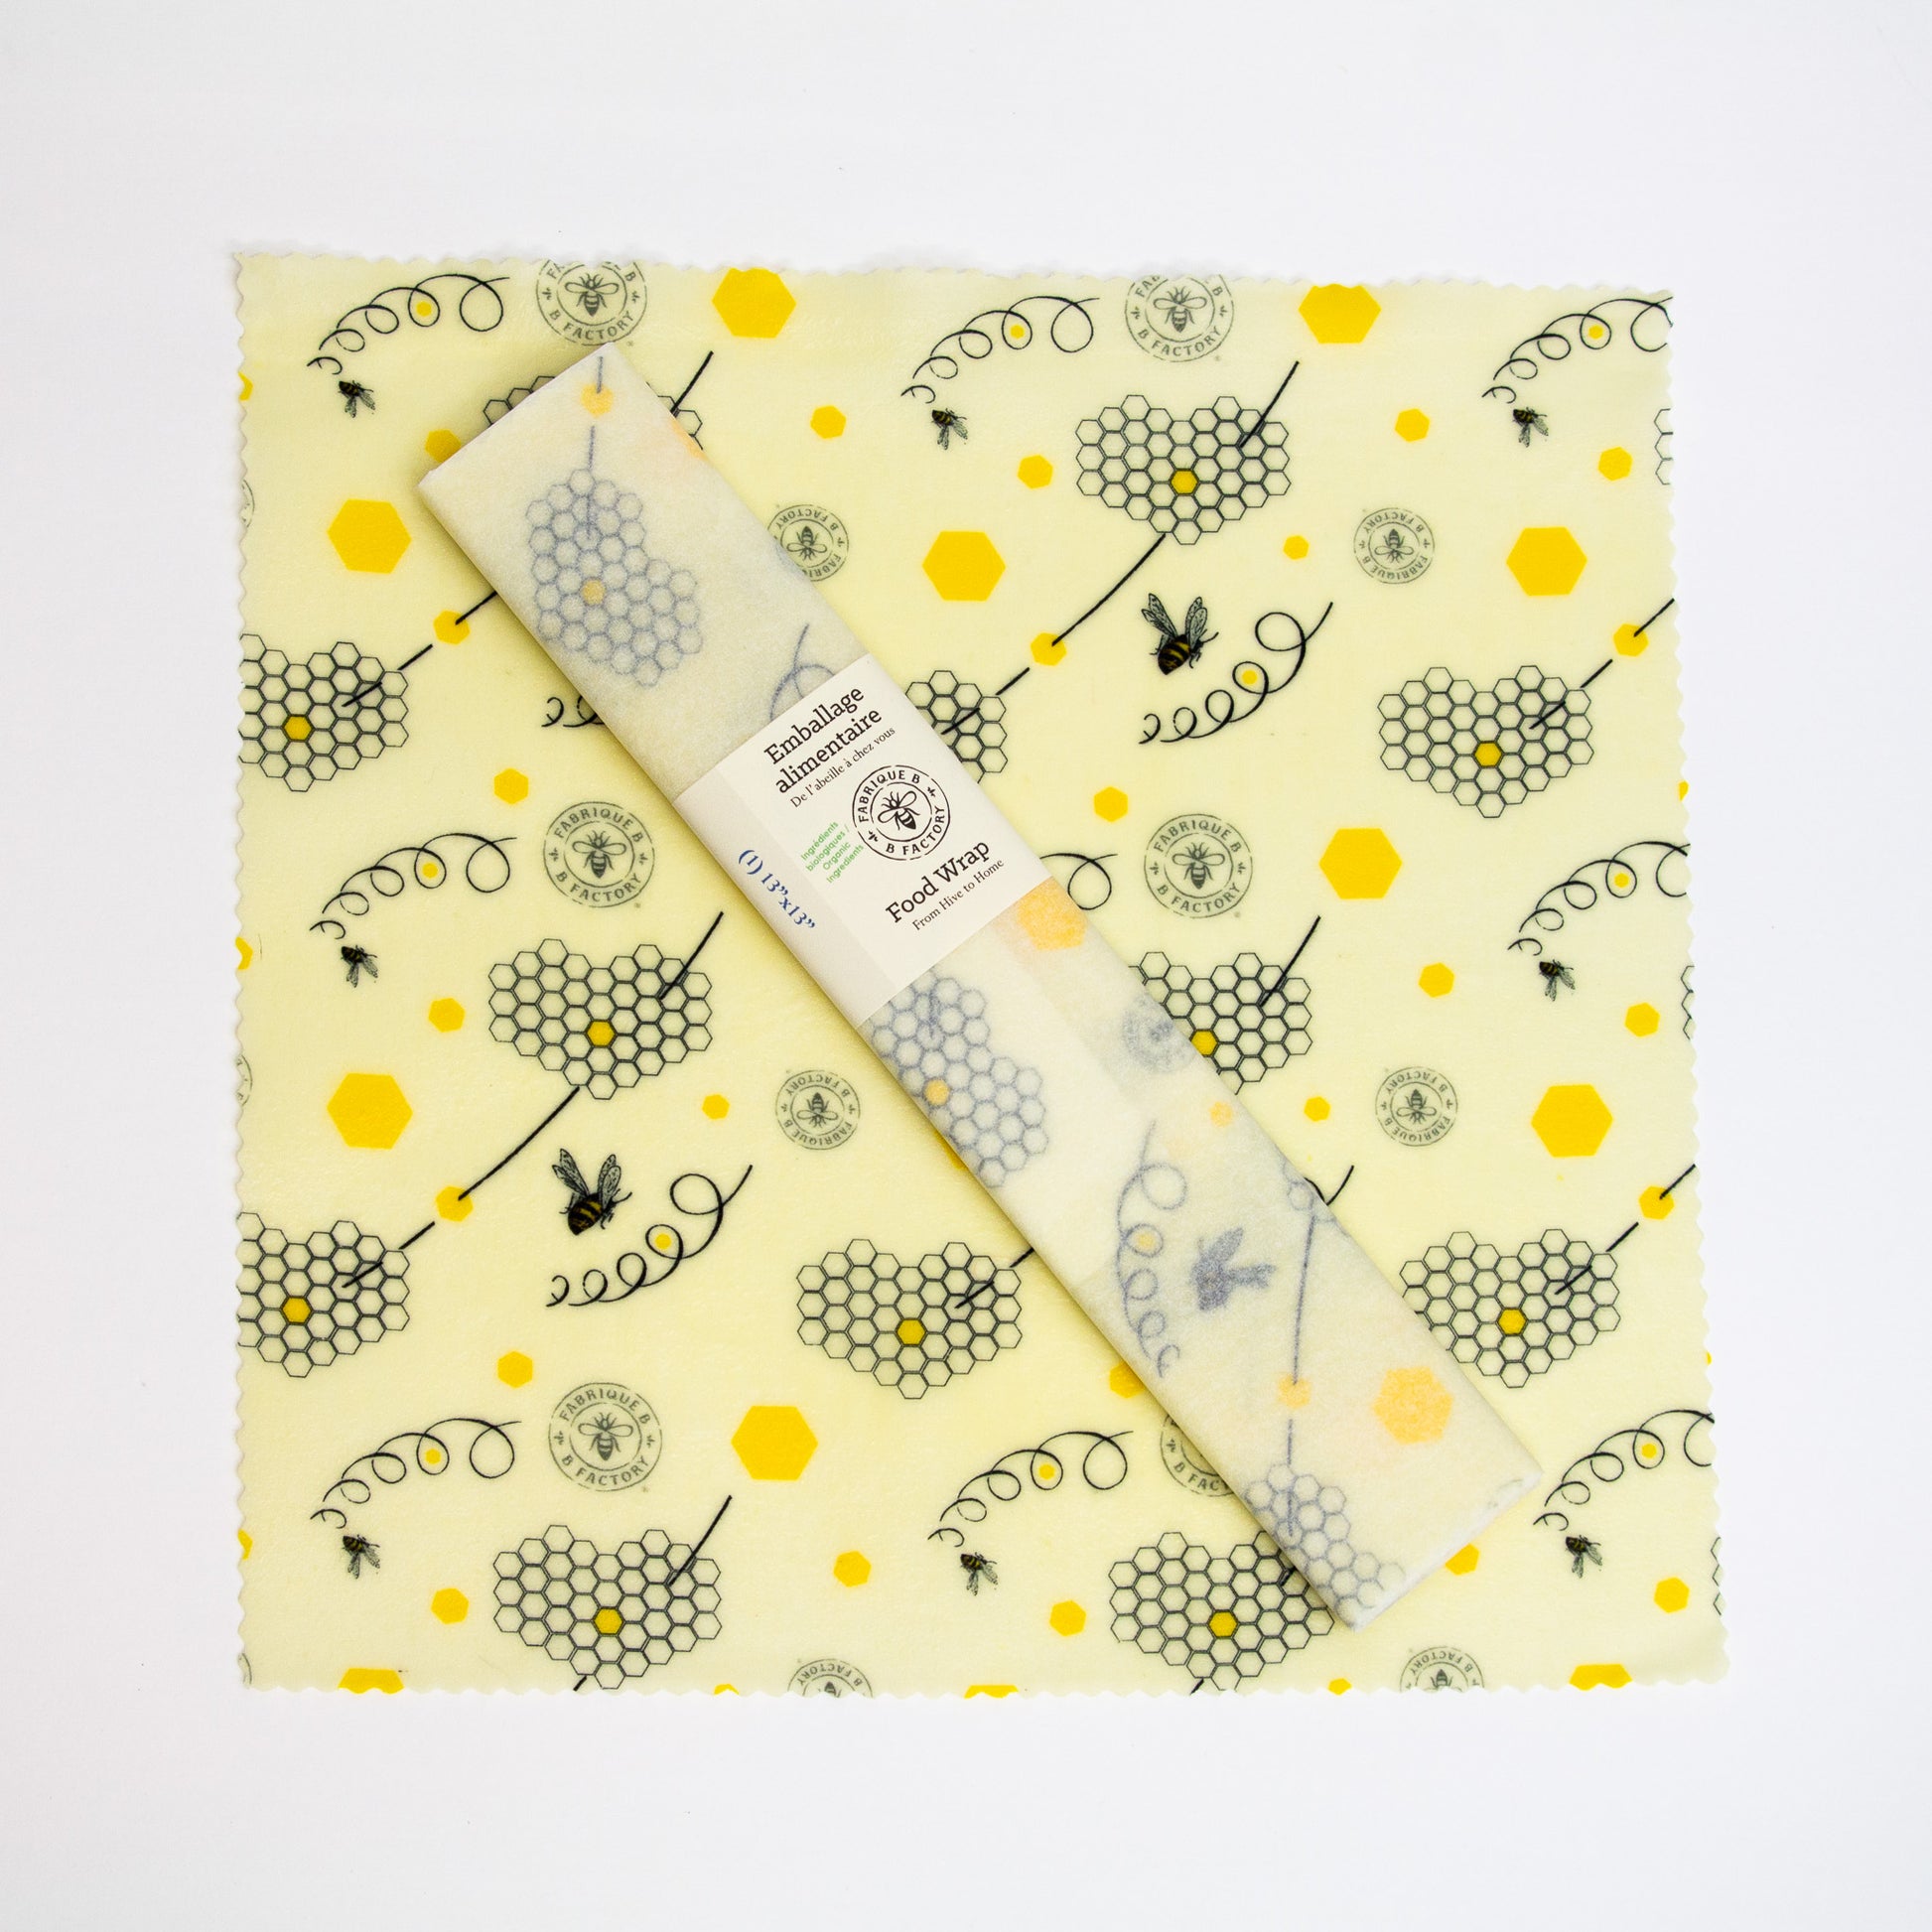 A 13-inch square patterned beeswax food wrap with honeycomb and bee design and a wrapped beeswax wrap sitting on top with B Factory logo